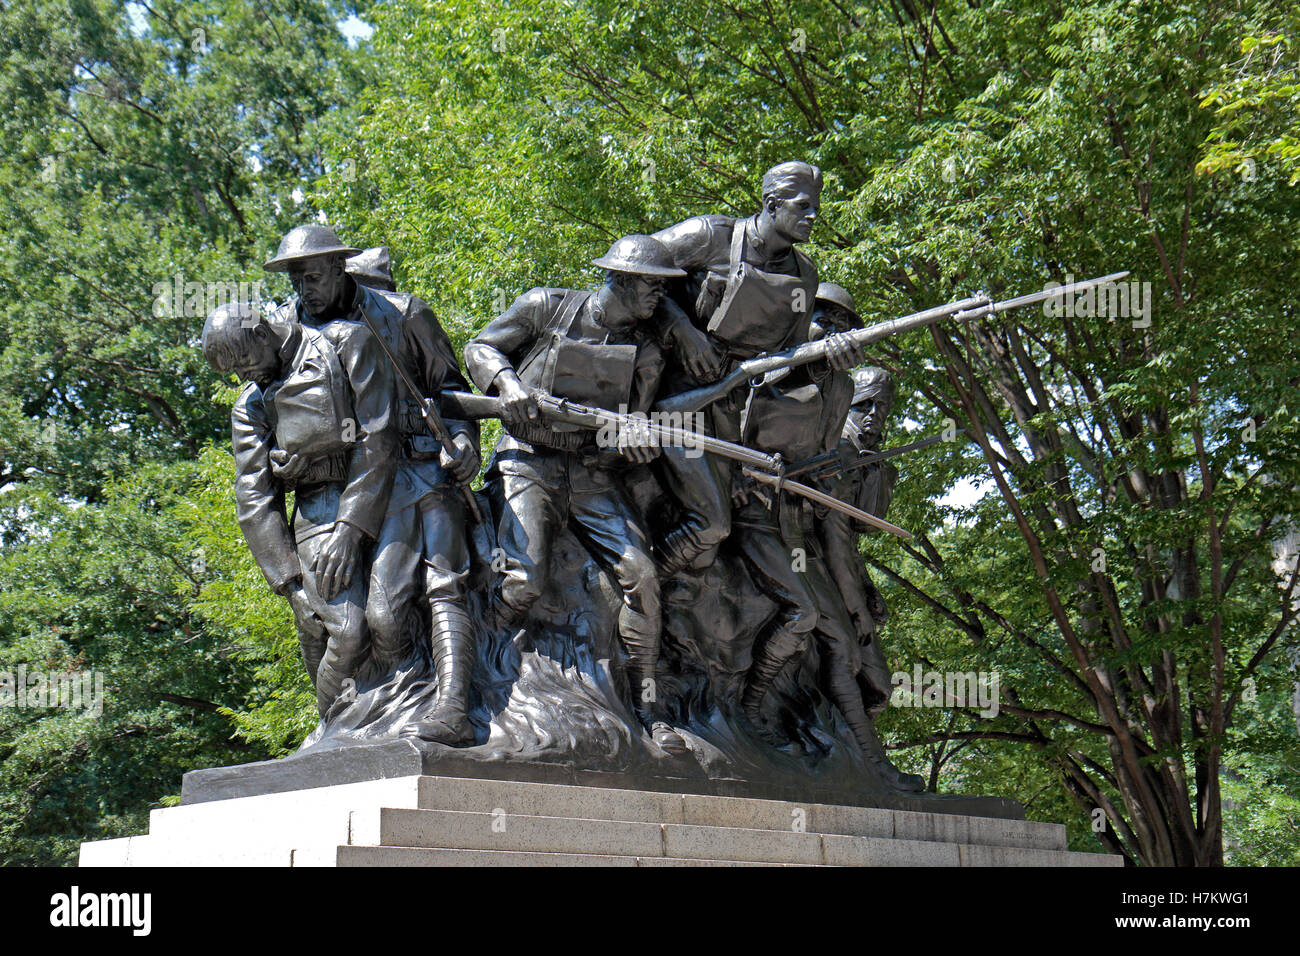 The One Hundred and Seventh Regiment of New York War Memorial in Central Park, Manhattan, New York, United States. Stock Photo